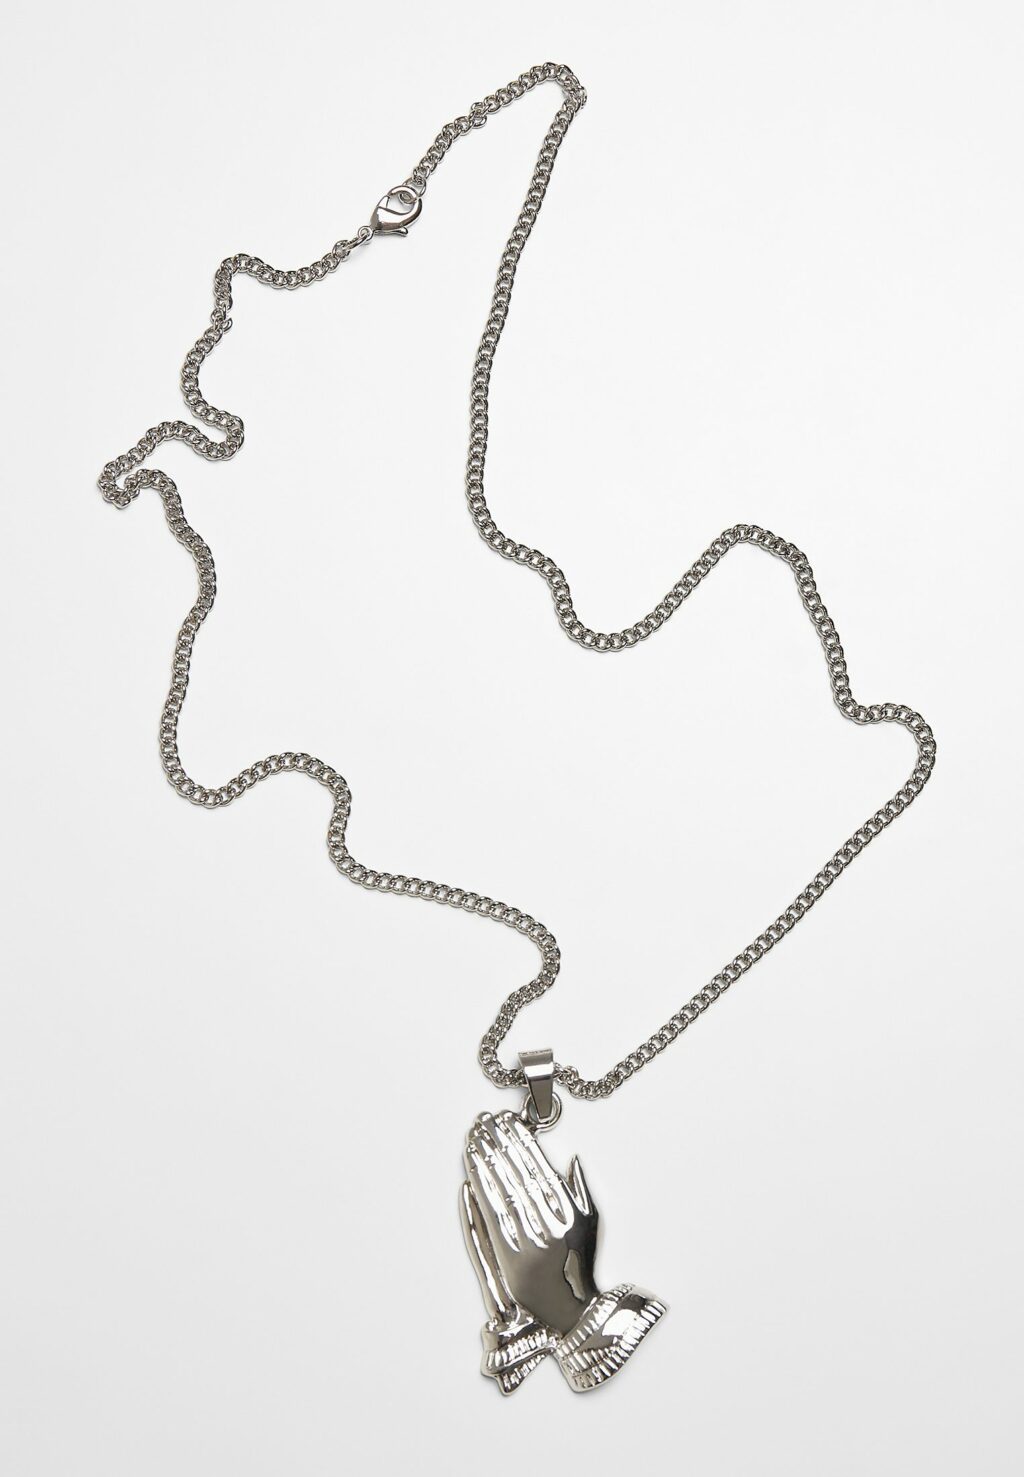 Pray Hands Necklace silver one TB4049